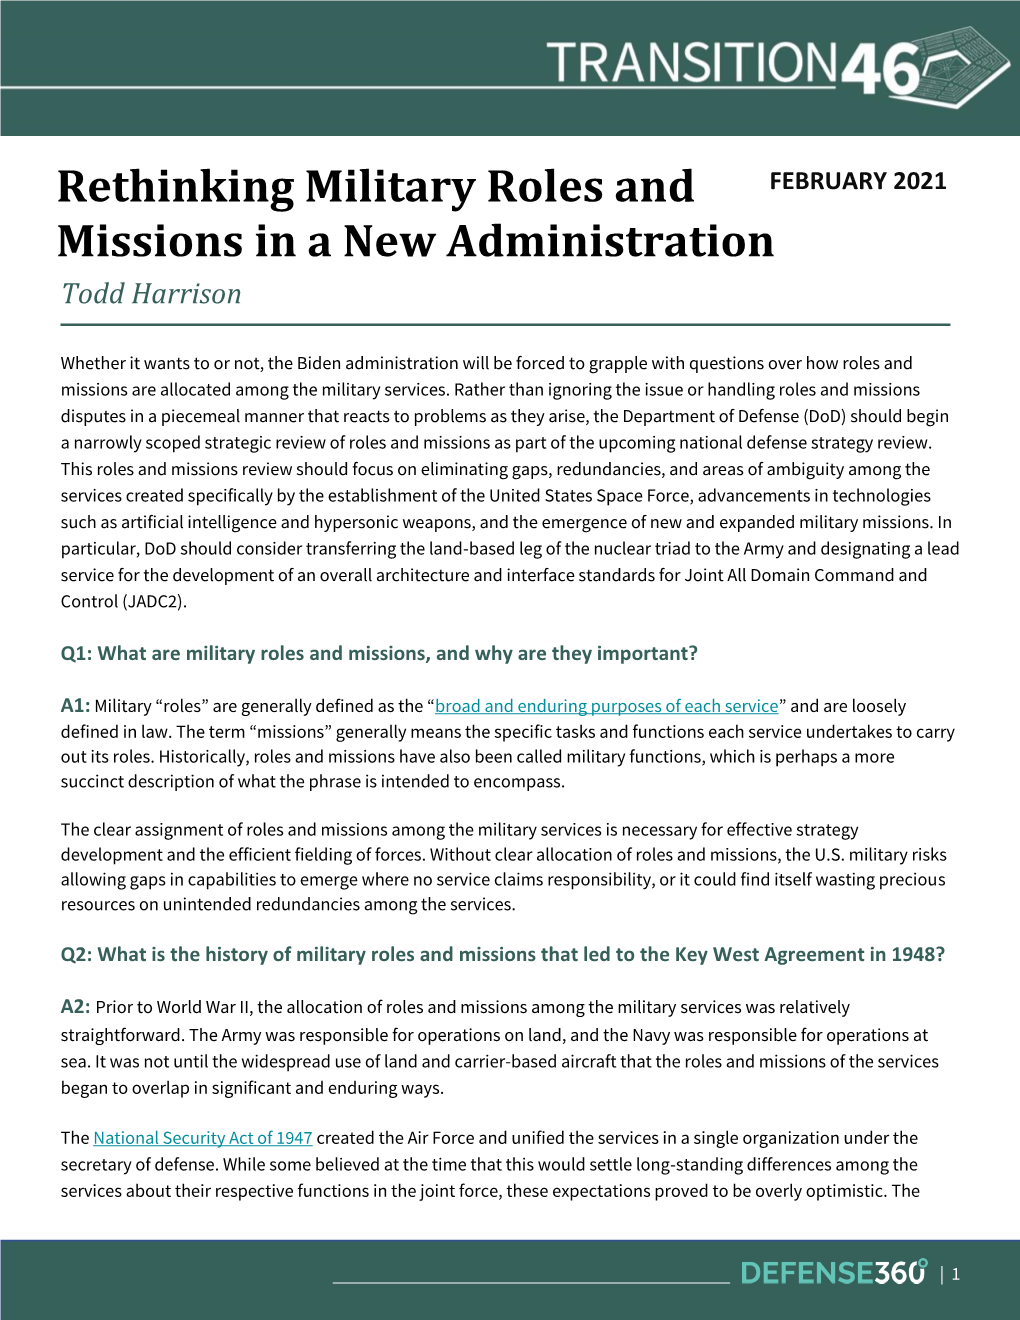 Rethinking Military Roles and Missions in a New Administration